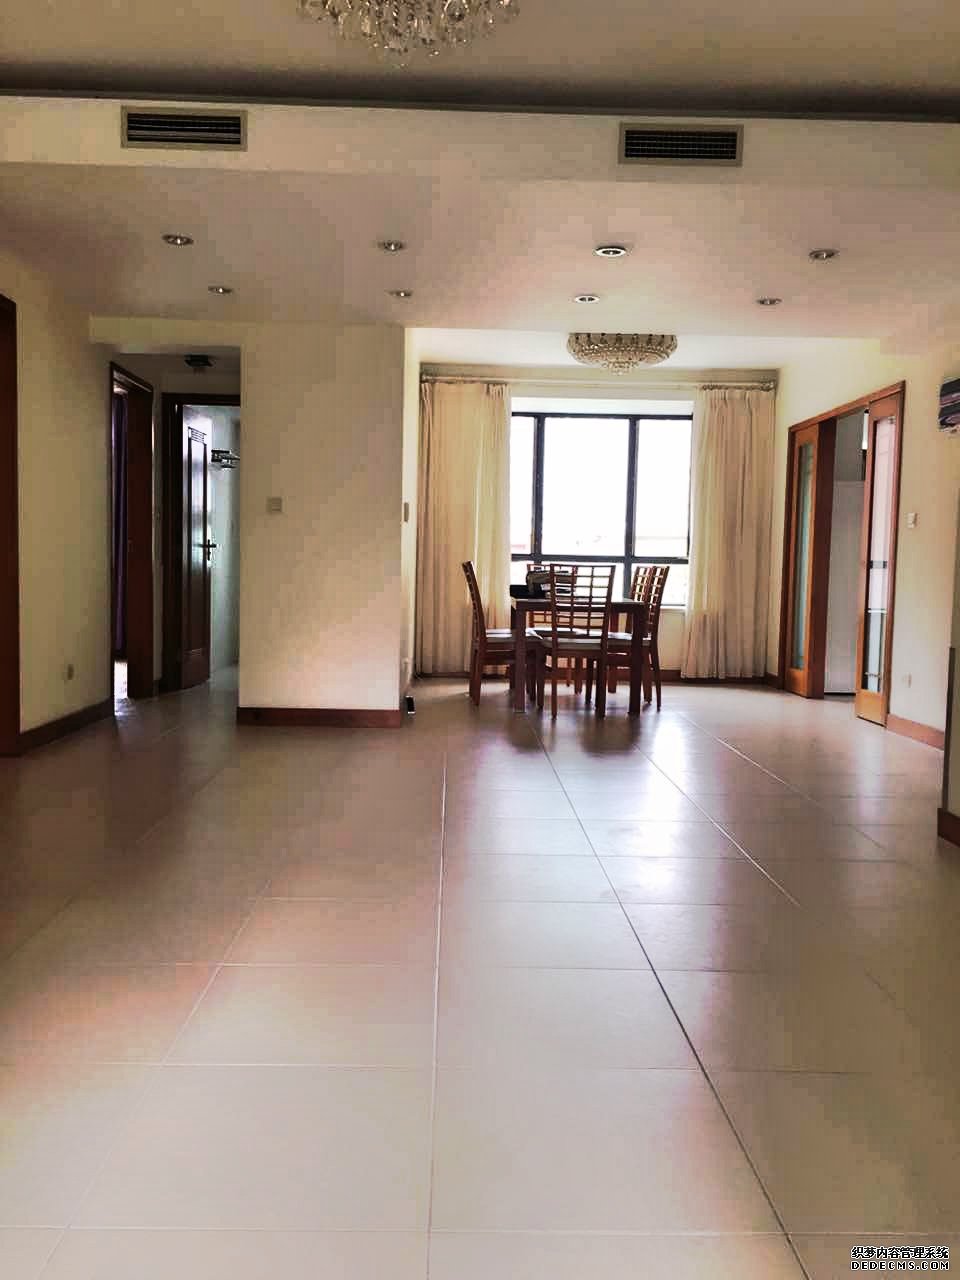  160sqm 3BR Apartment for rent next to Changping Road